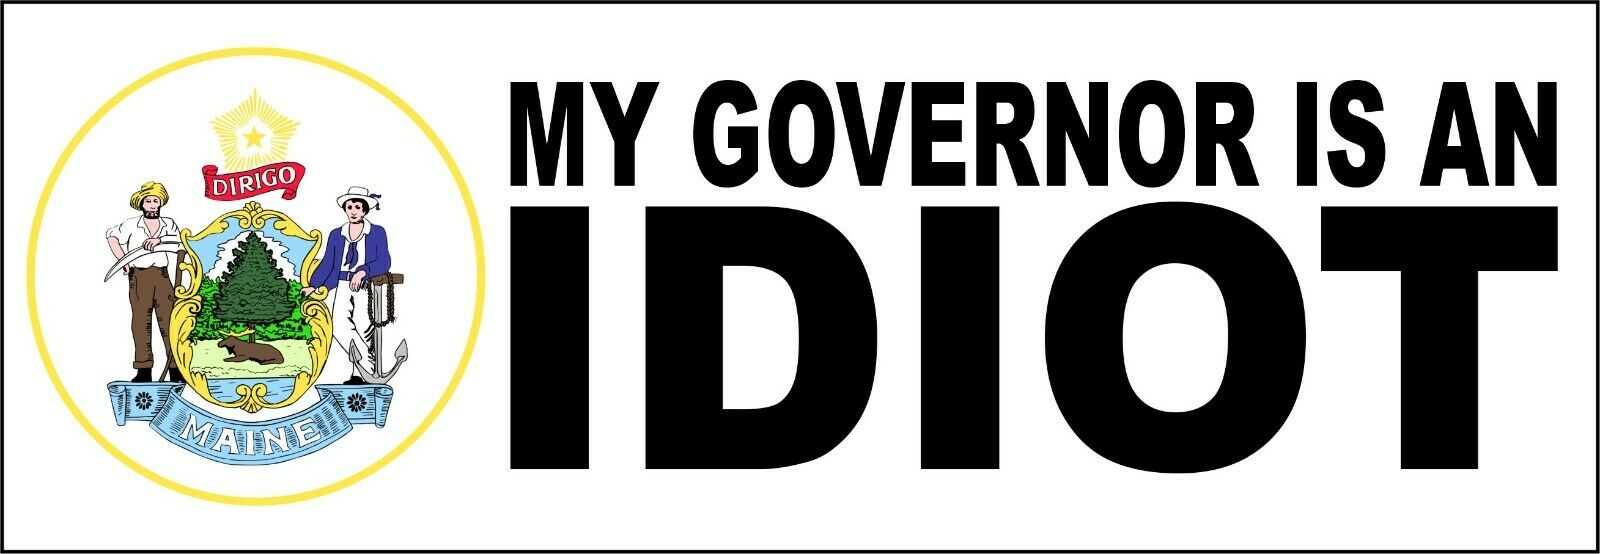 My governor is an idiot bumper sticker - State of Maine 8.8" x 3" Decal - Powercall Sirens LLC